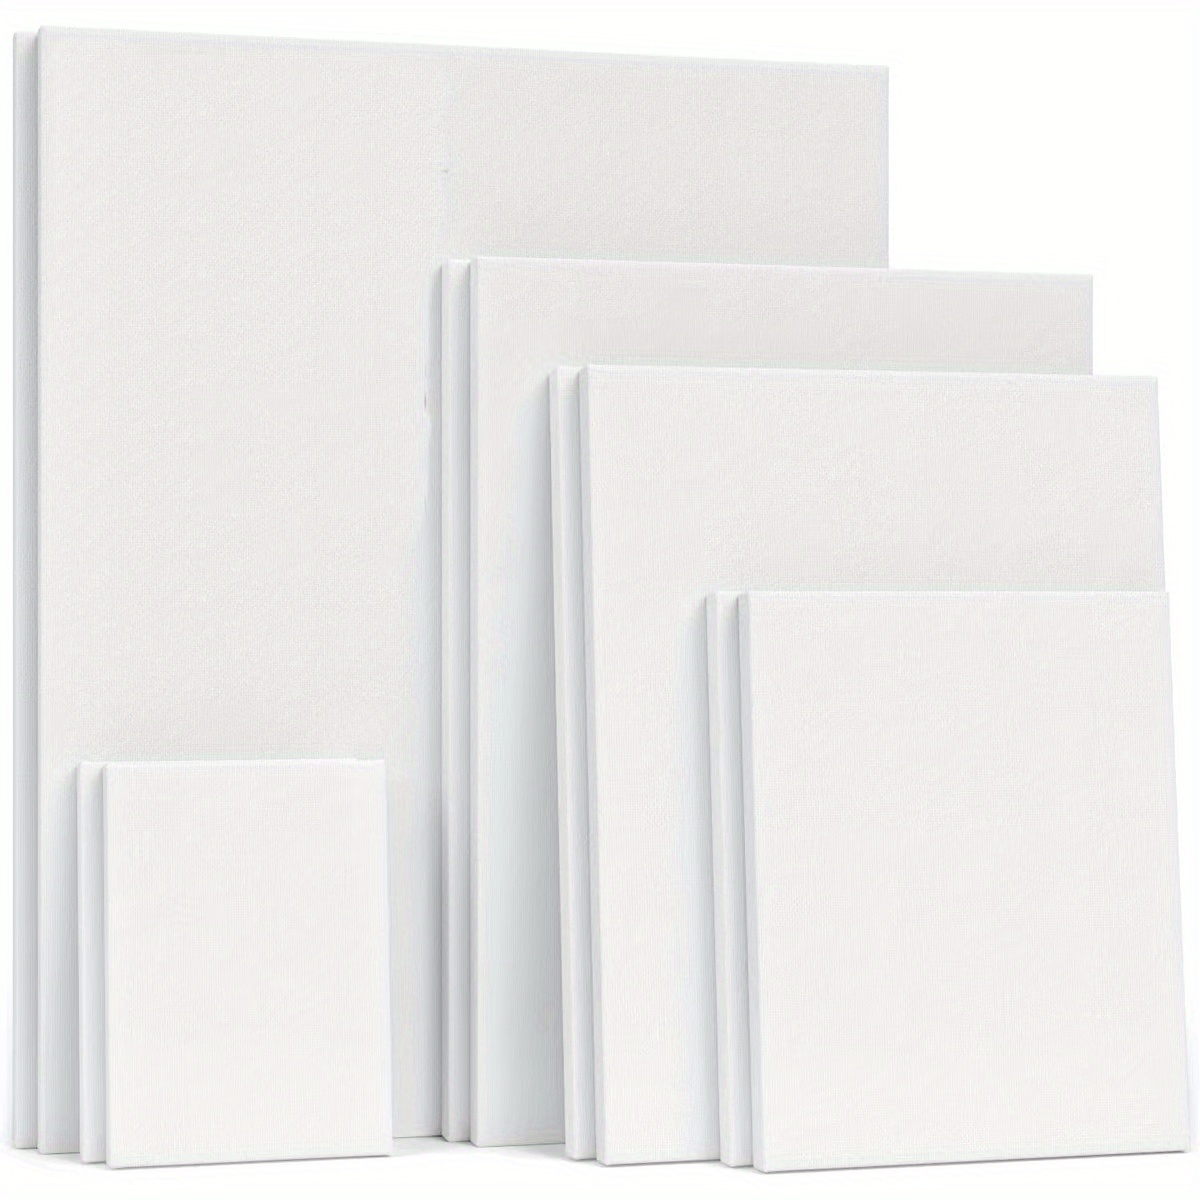 20 Pack Canvases for Painting with 8x10 Painting Canvas for Oil & Acrylic  Paint. 20 Packs-1Sizes( 8*10in)